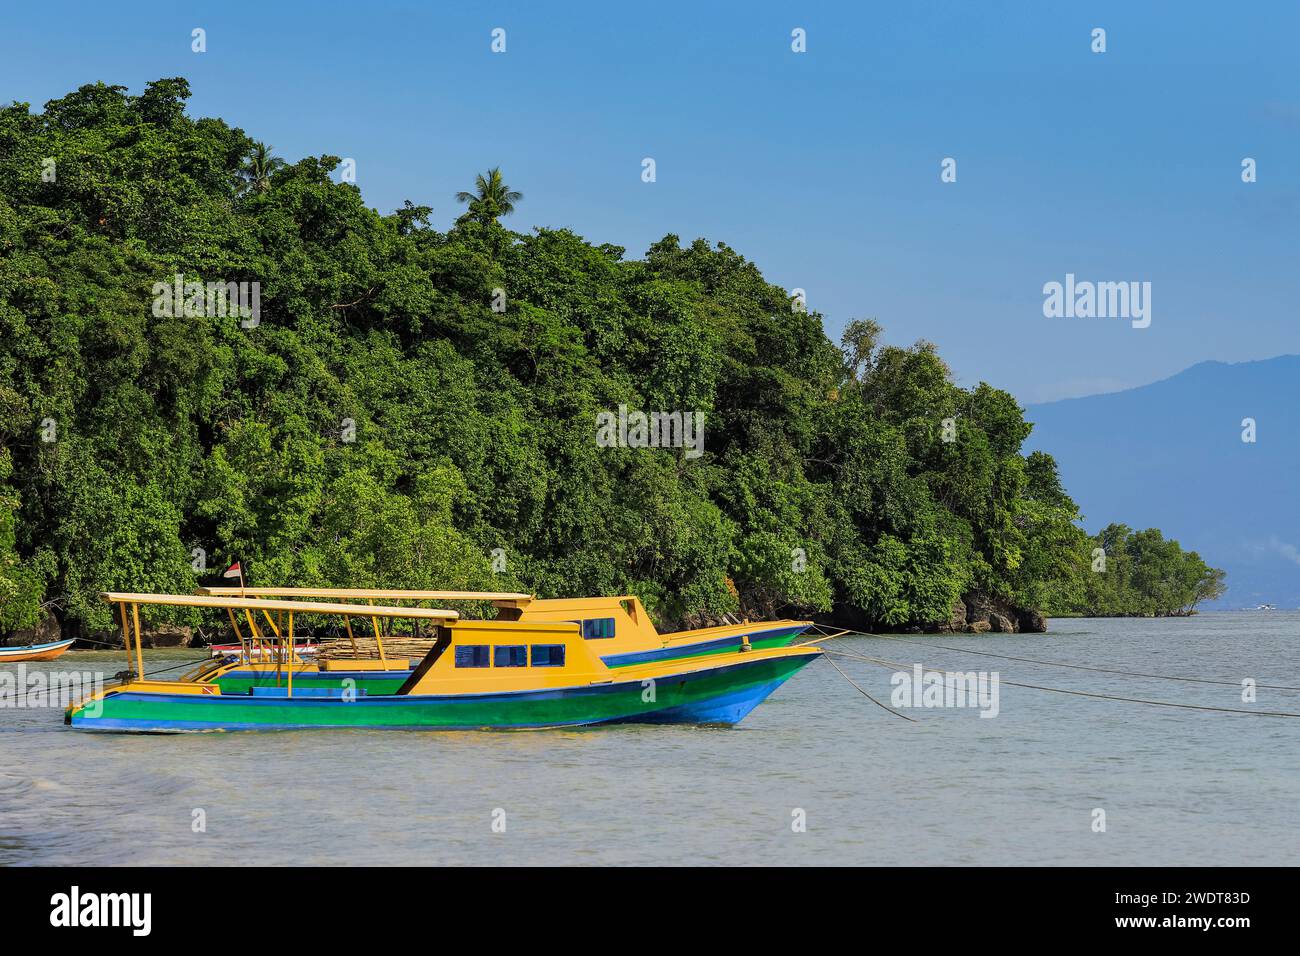 Ferry boats moored on the central bay of this coral fringed holiday and scuba dive destination, Bunaken Island, North Sulawesi, Indonesia Stock Photo